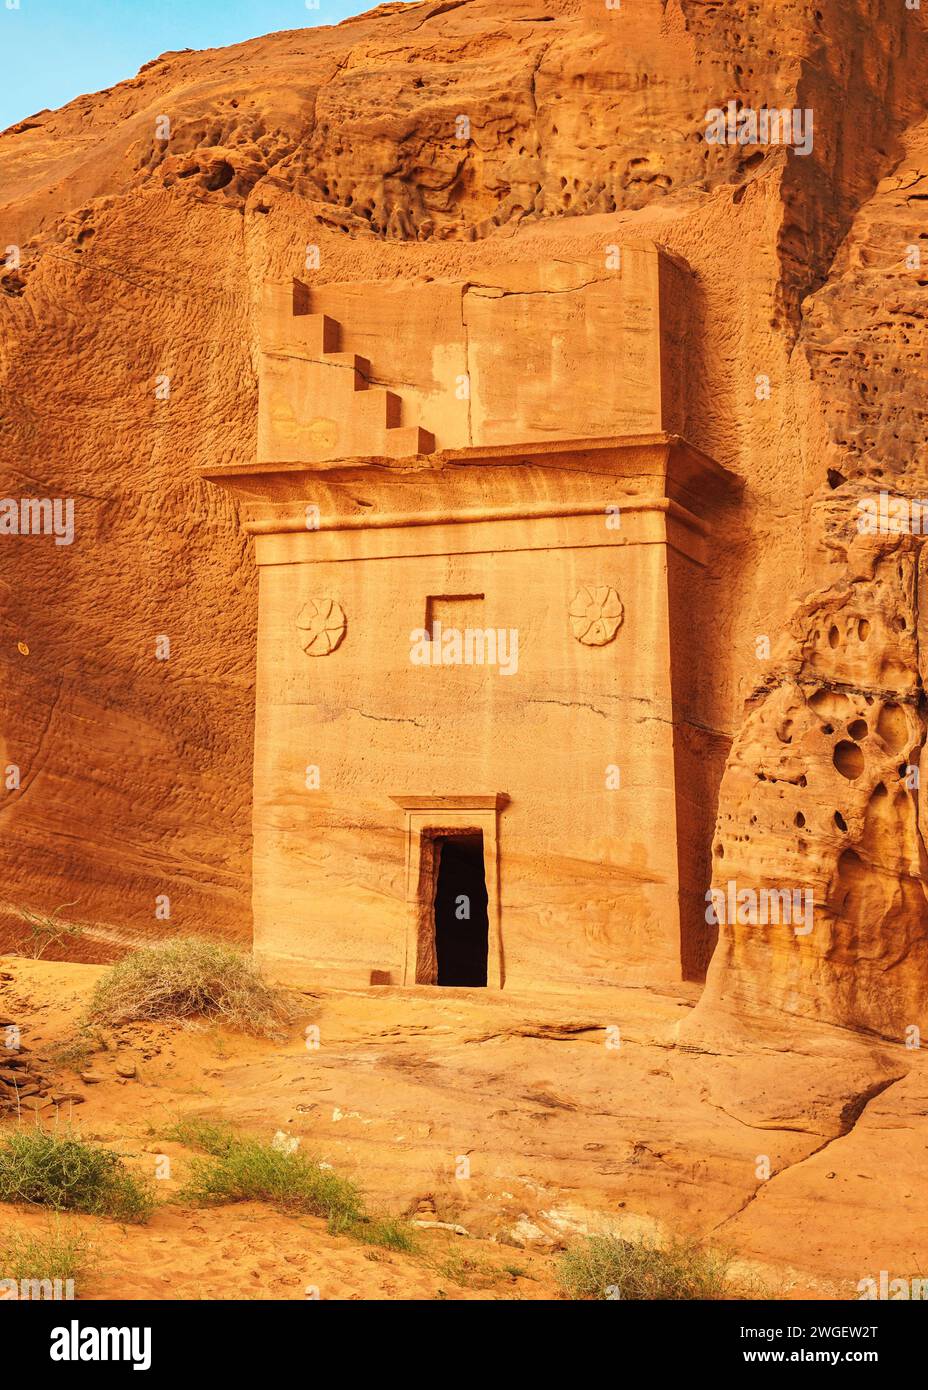 Old Nabatean architecture carved on orange sandstone wall at Jabal Al Ahmar, Hegra in Saudi Arabia, 18 ancient tombs are located here, 111 in whole Ma Stock Photo